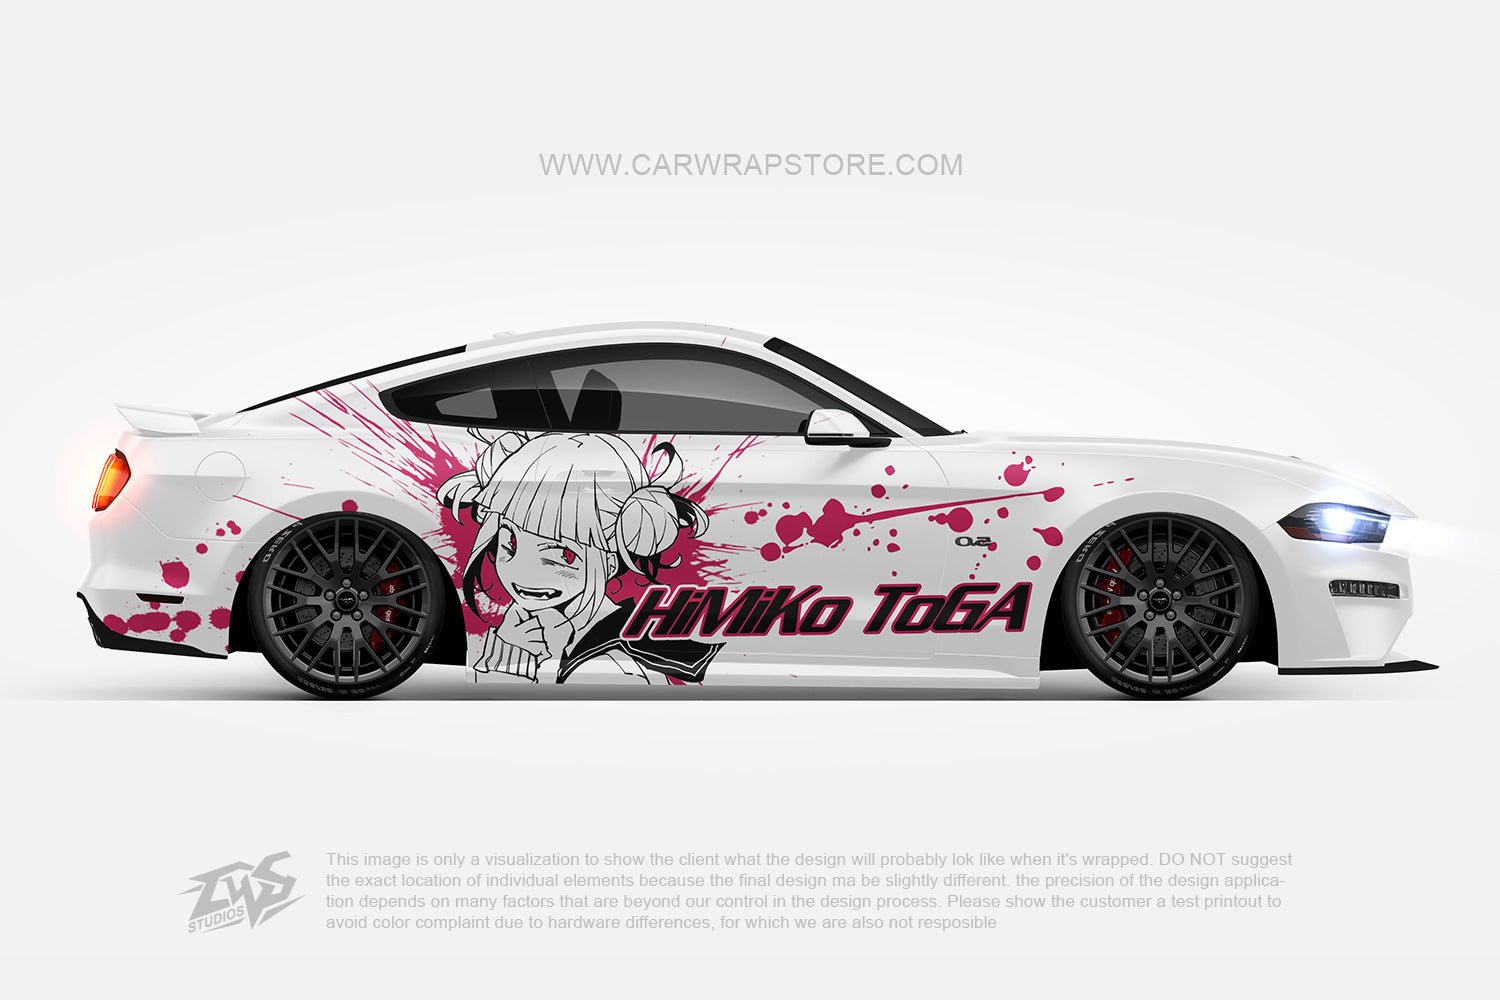 Anime wraps on all my Online cars  rneedforspeed